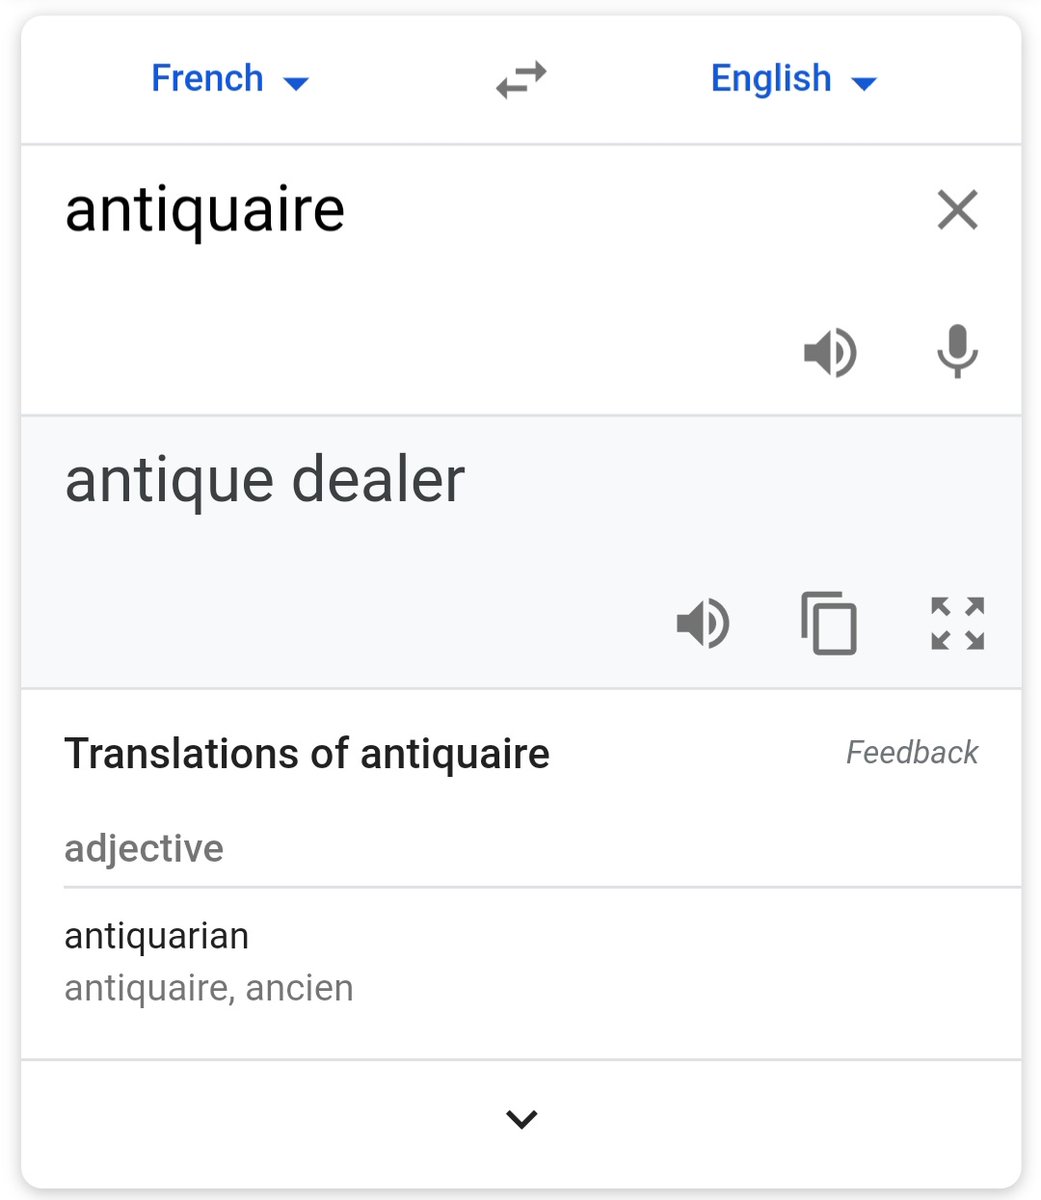 Lastly, Antiquaire- antique dealer? yeah this adds to the old/retro idea.